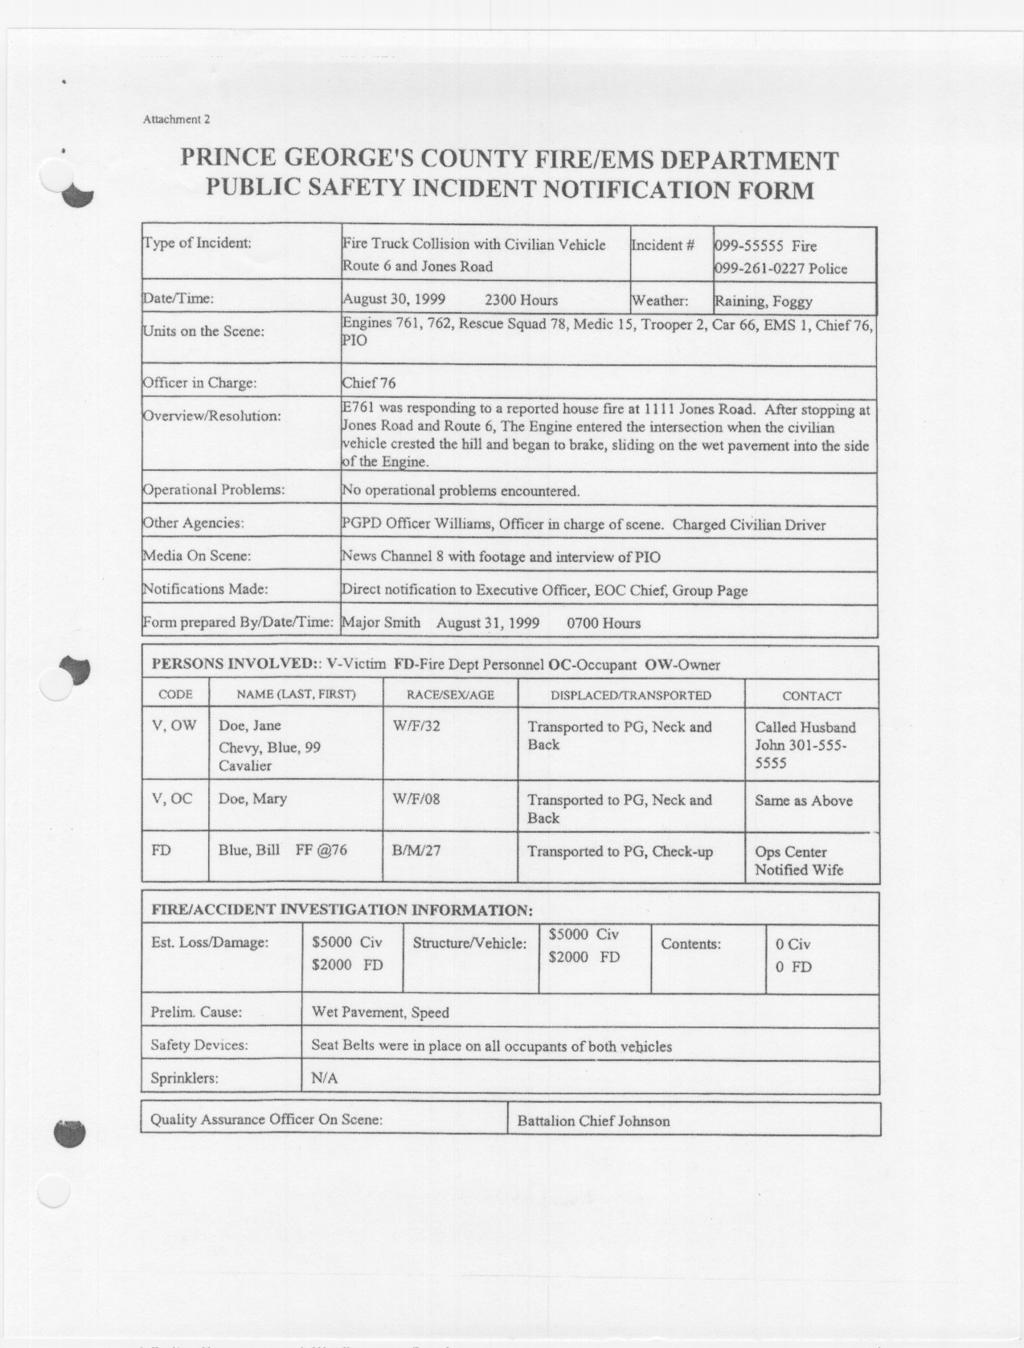 --- Attachment 2.. PRINCE GEORGE'S COUNTYFIRE/EMS DEPARTMENT PUBLIC SAFETY INCIDENT NOTIFICATION FORM -ire Truck Collision with Civilian Vehicle oute 6 and Jones Road 9-55555 Fire 9-261-0227Police.